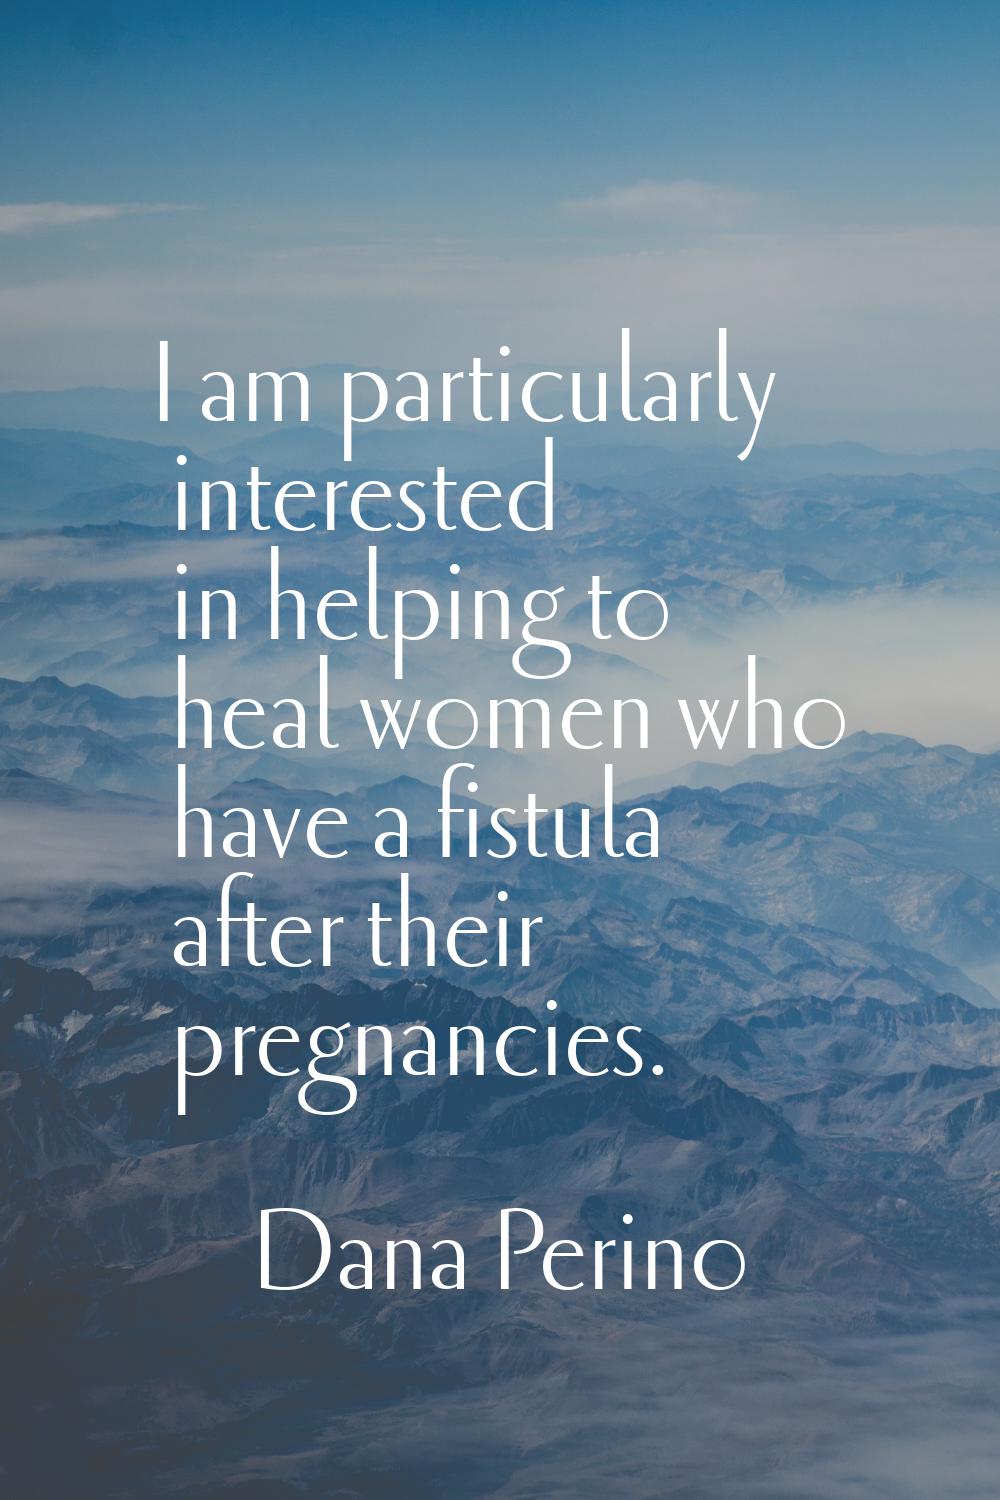 I am particularly interested in helping to heal women who have a fistula after their pregnancies.